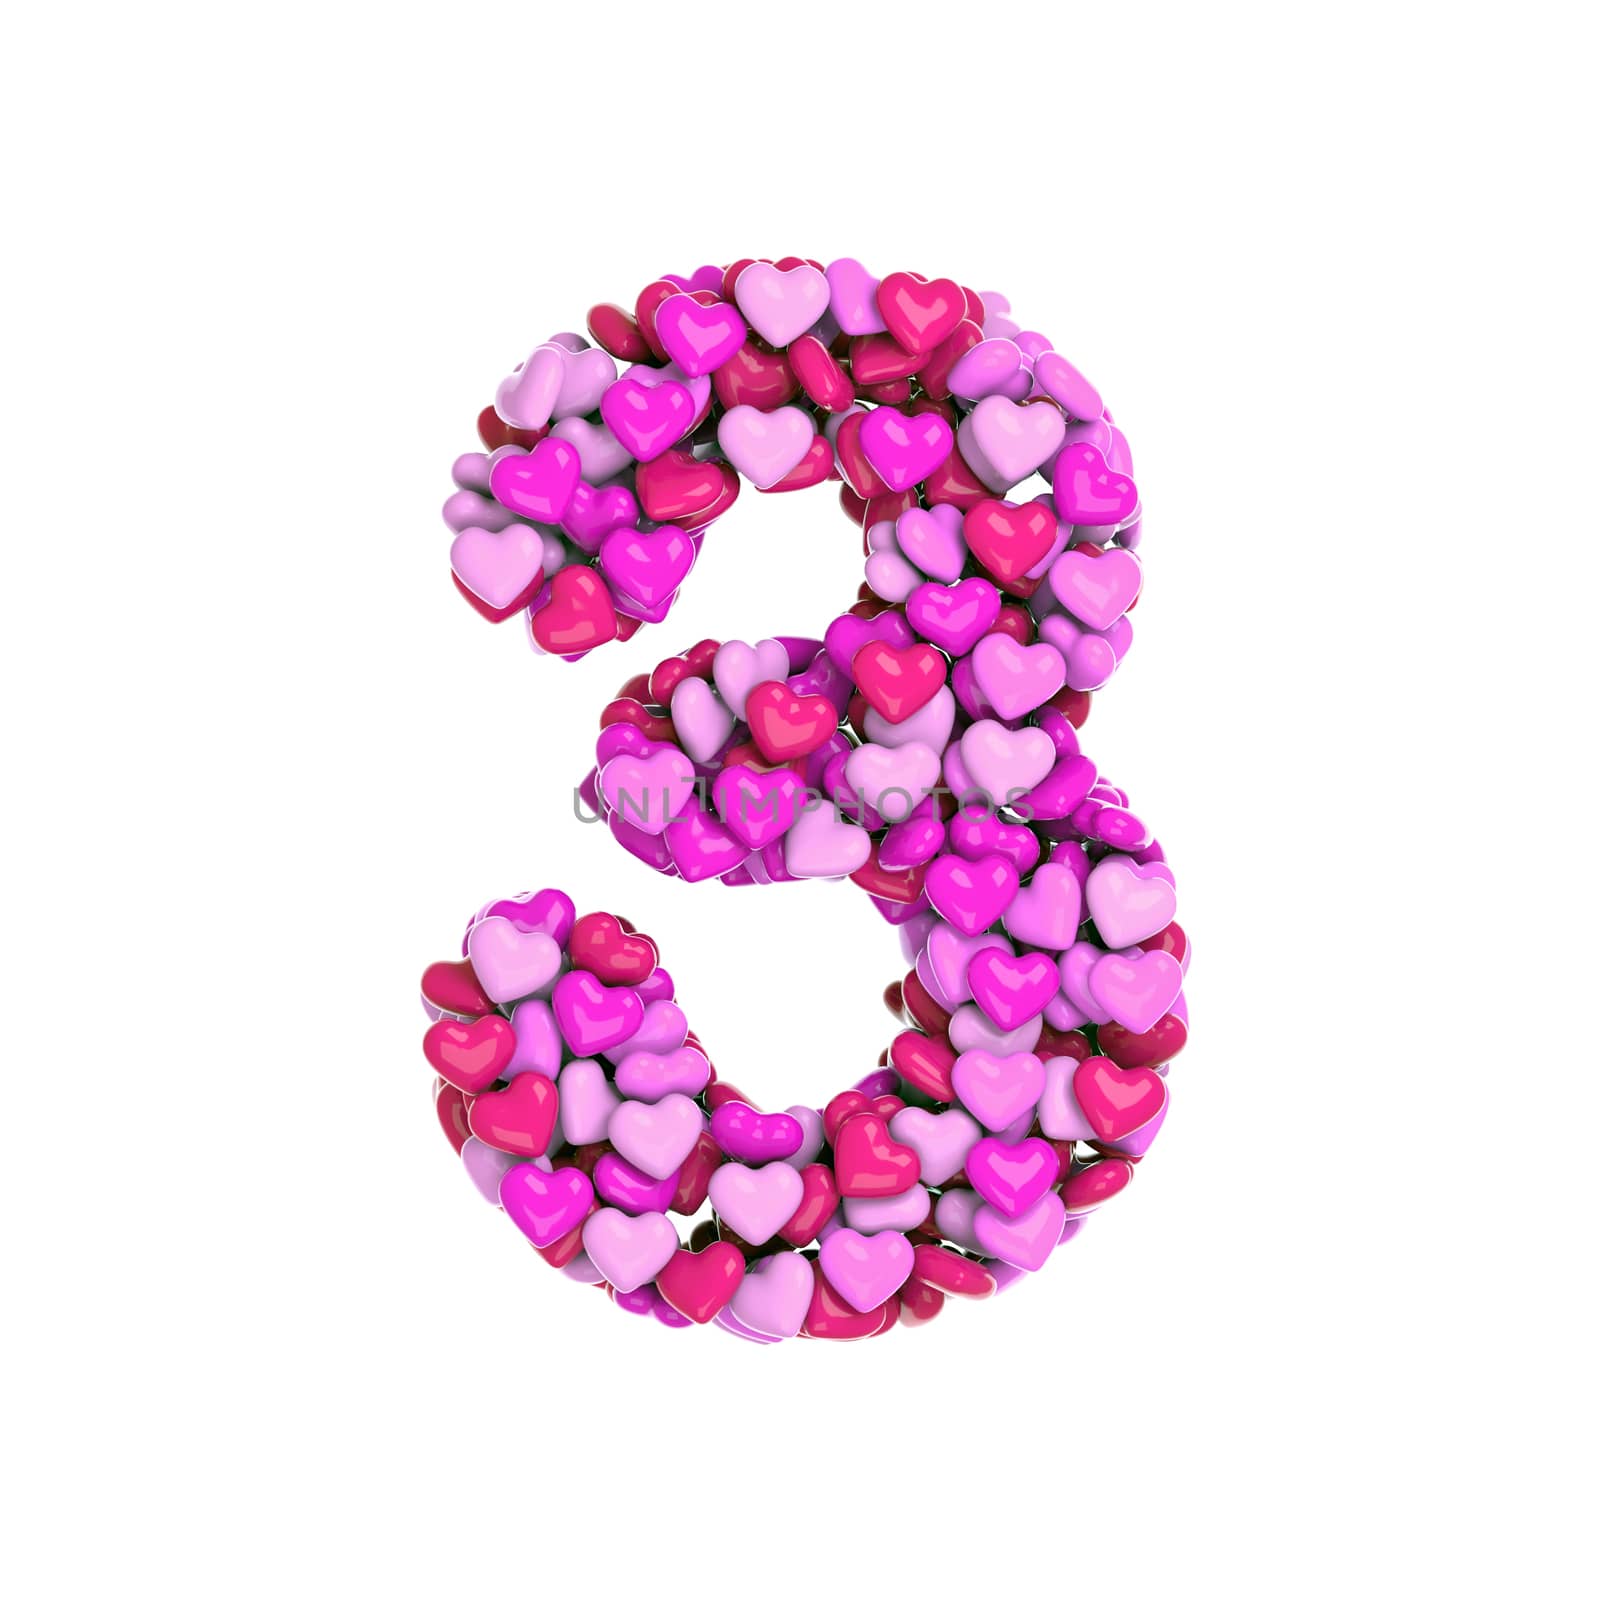 Valentine number 3 -  3d pink hearts digit - Love, passion or wedding concept by chrisroll